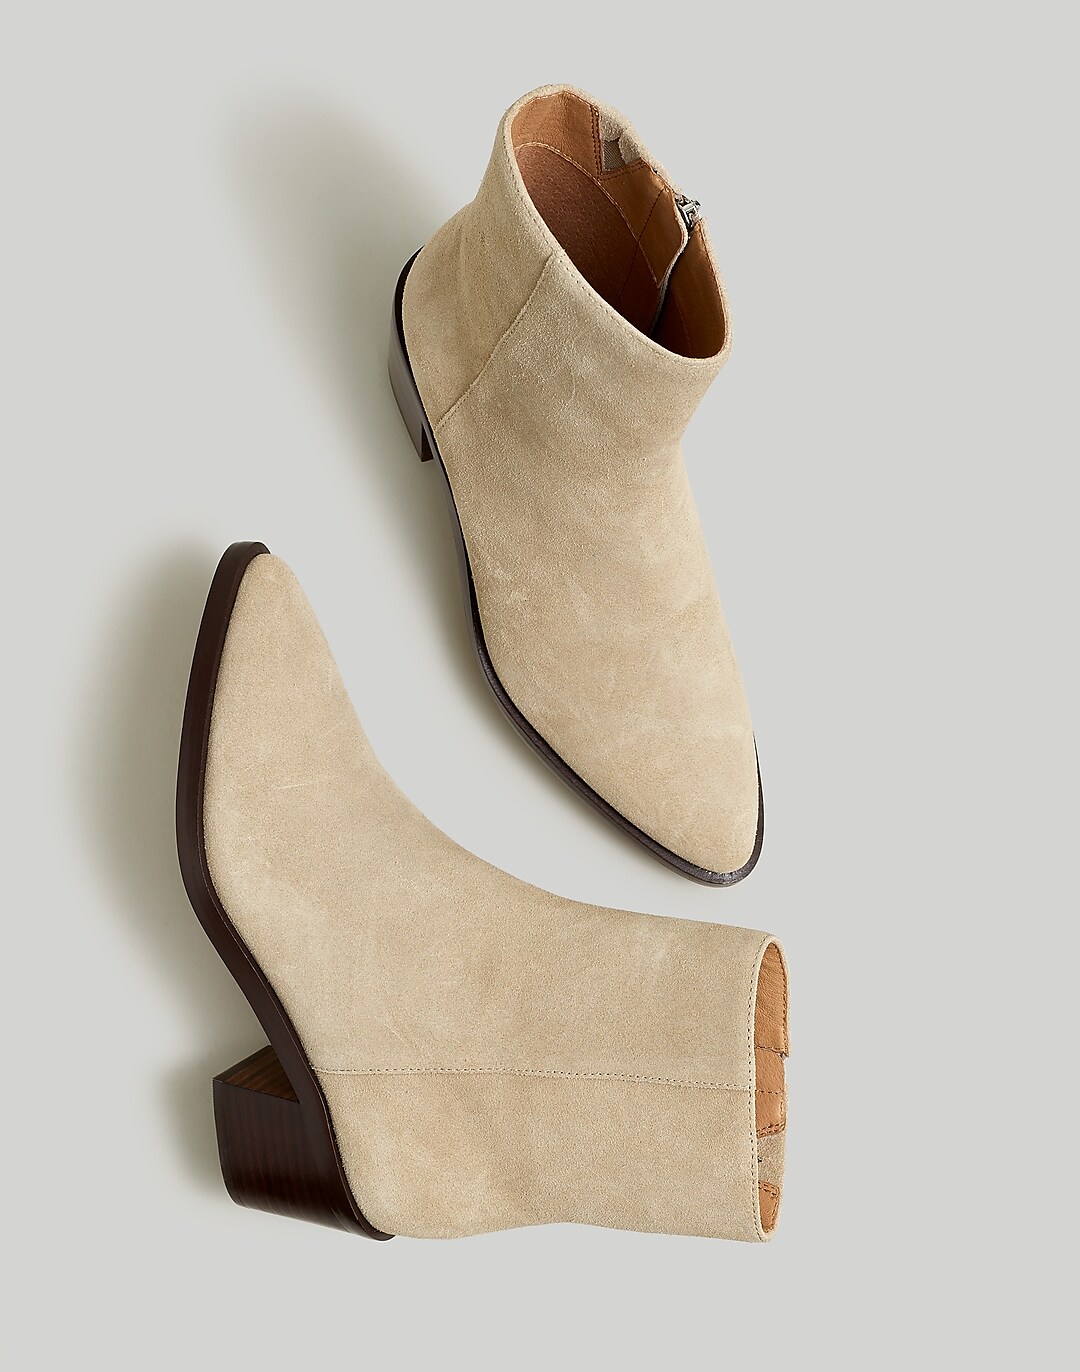 The Darcy Ankle Boot in Suede